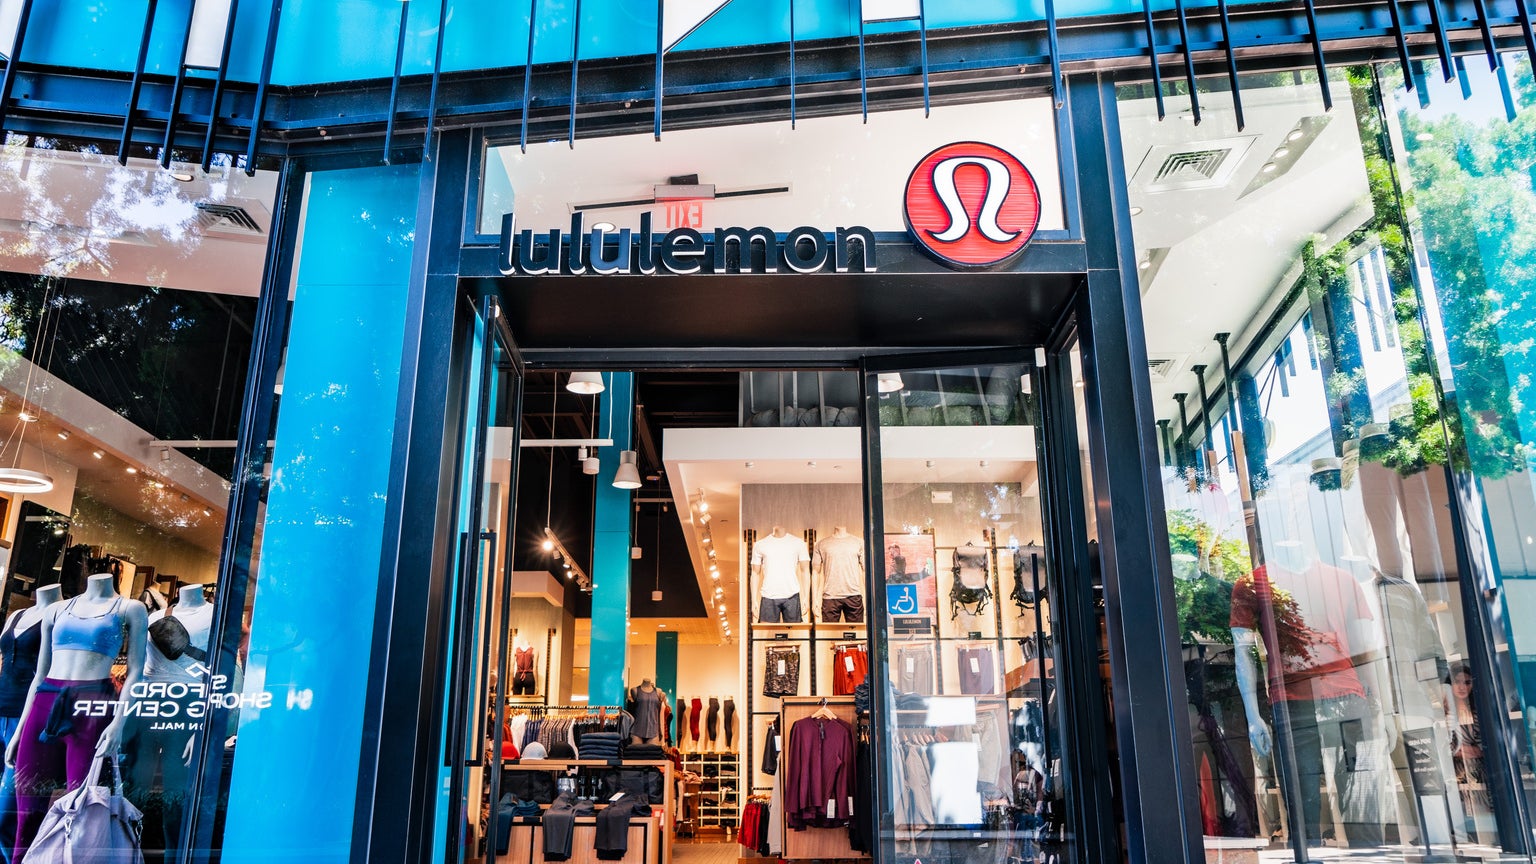 lululemon athletica reports an 18% revenue growth in Q2 FY23